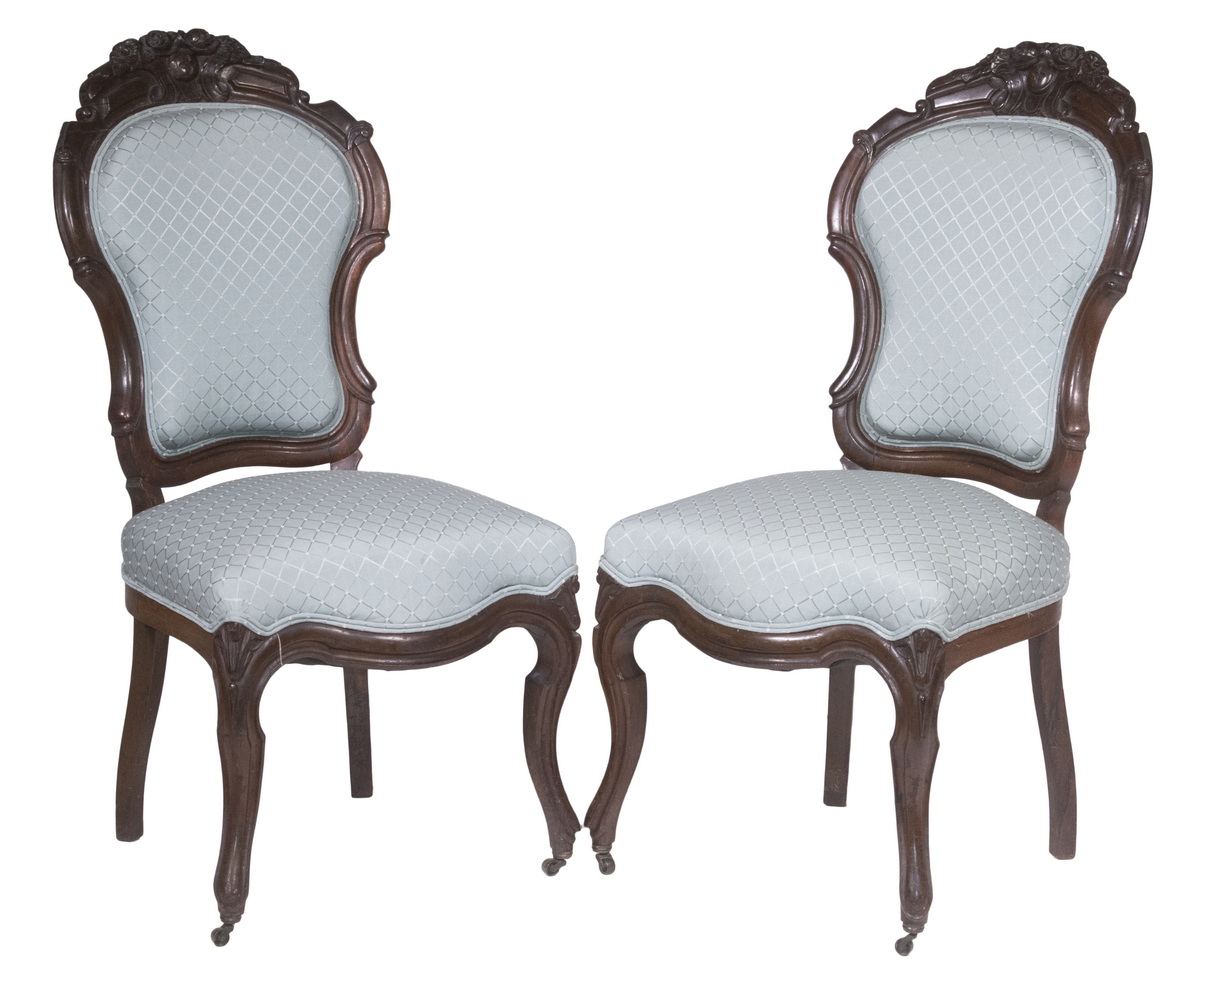 PR ROSEWOOD SIDE CHAIRS Pair of 3026c2